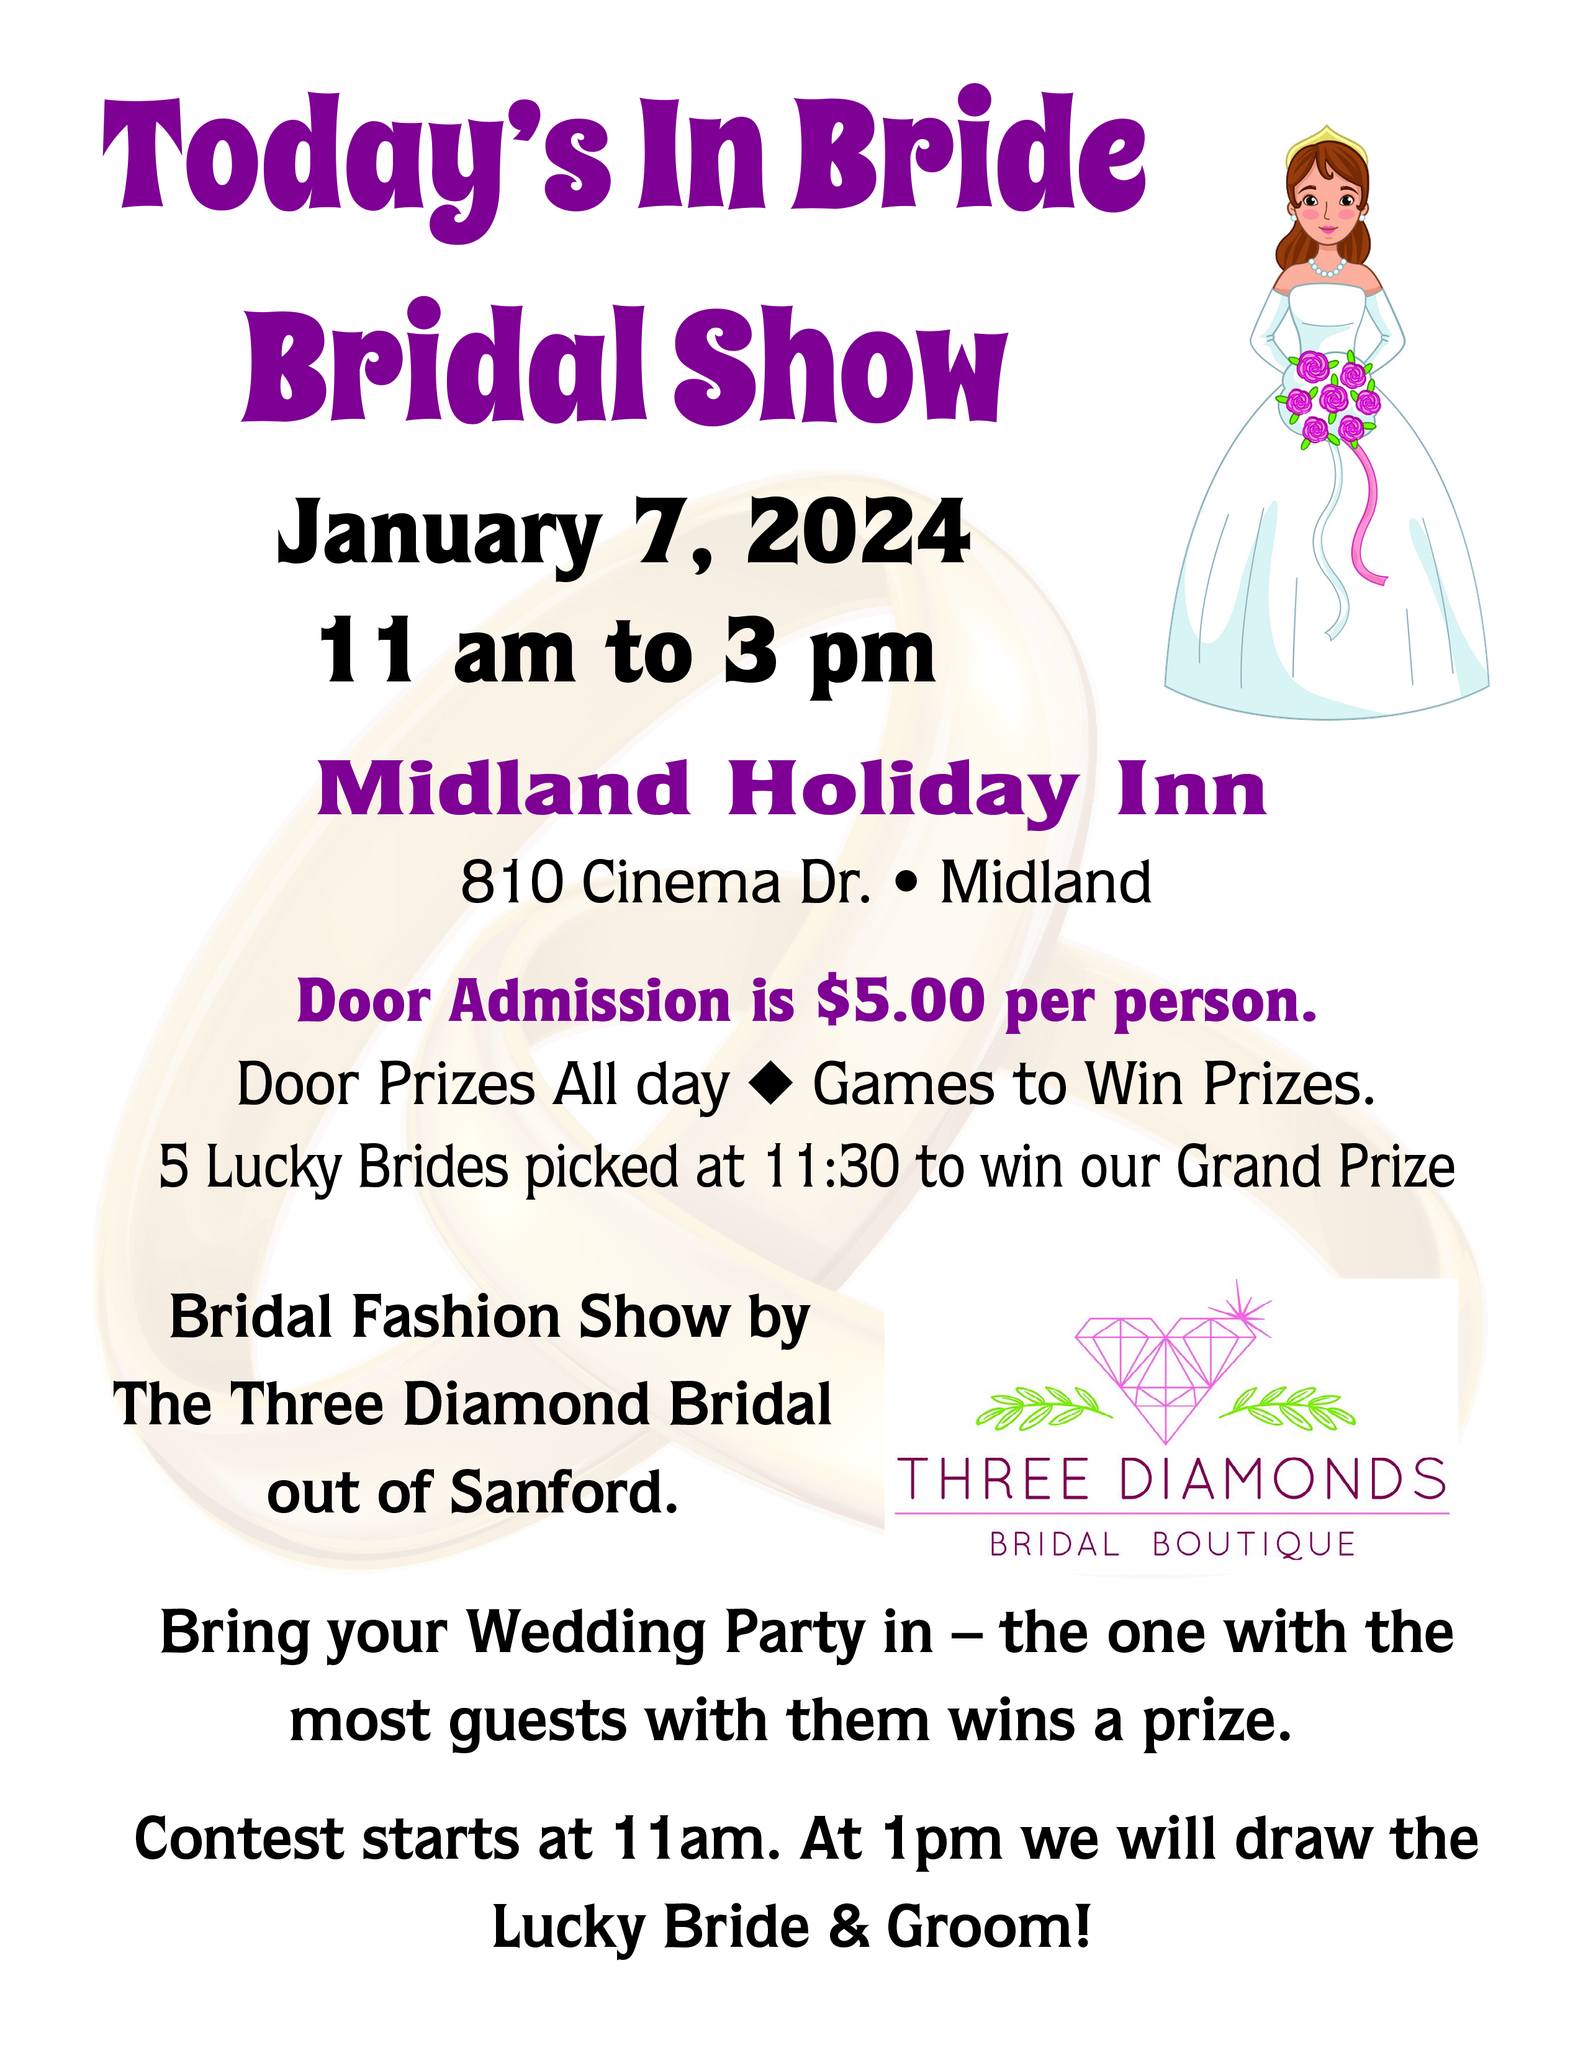 Today's In Bride Bridal Show, January 7, 2024